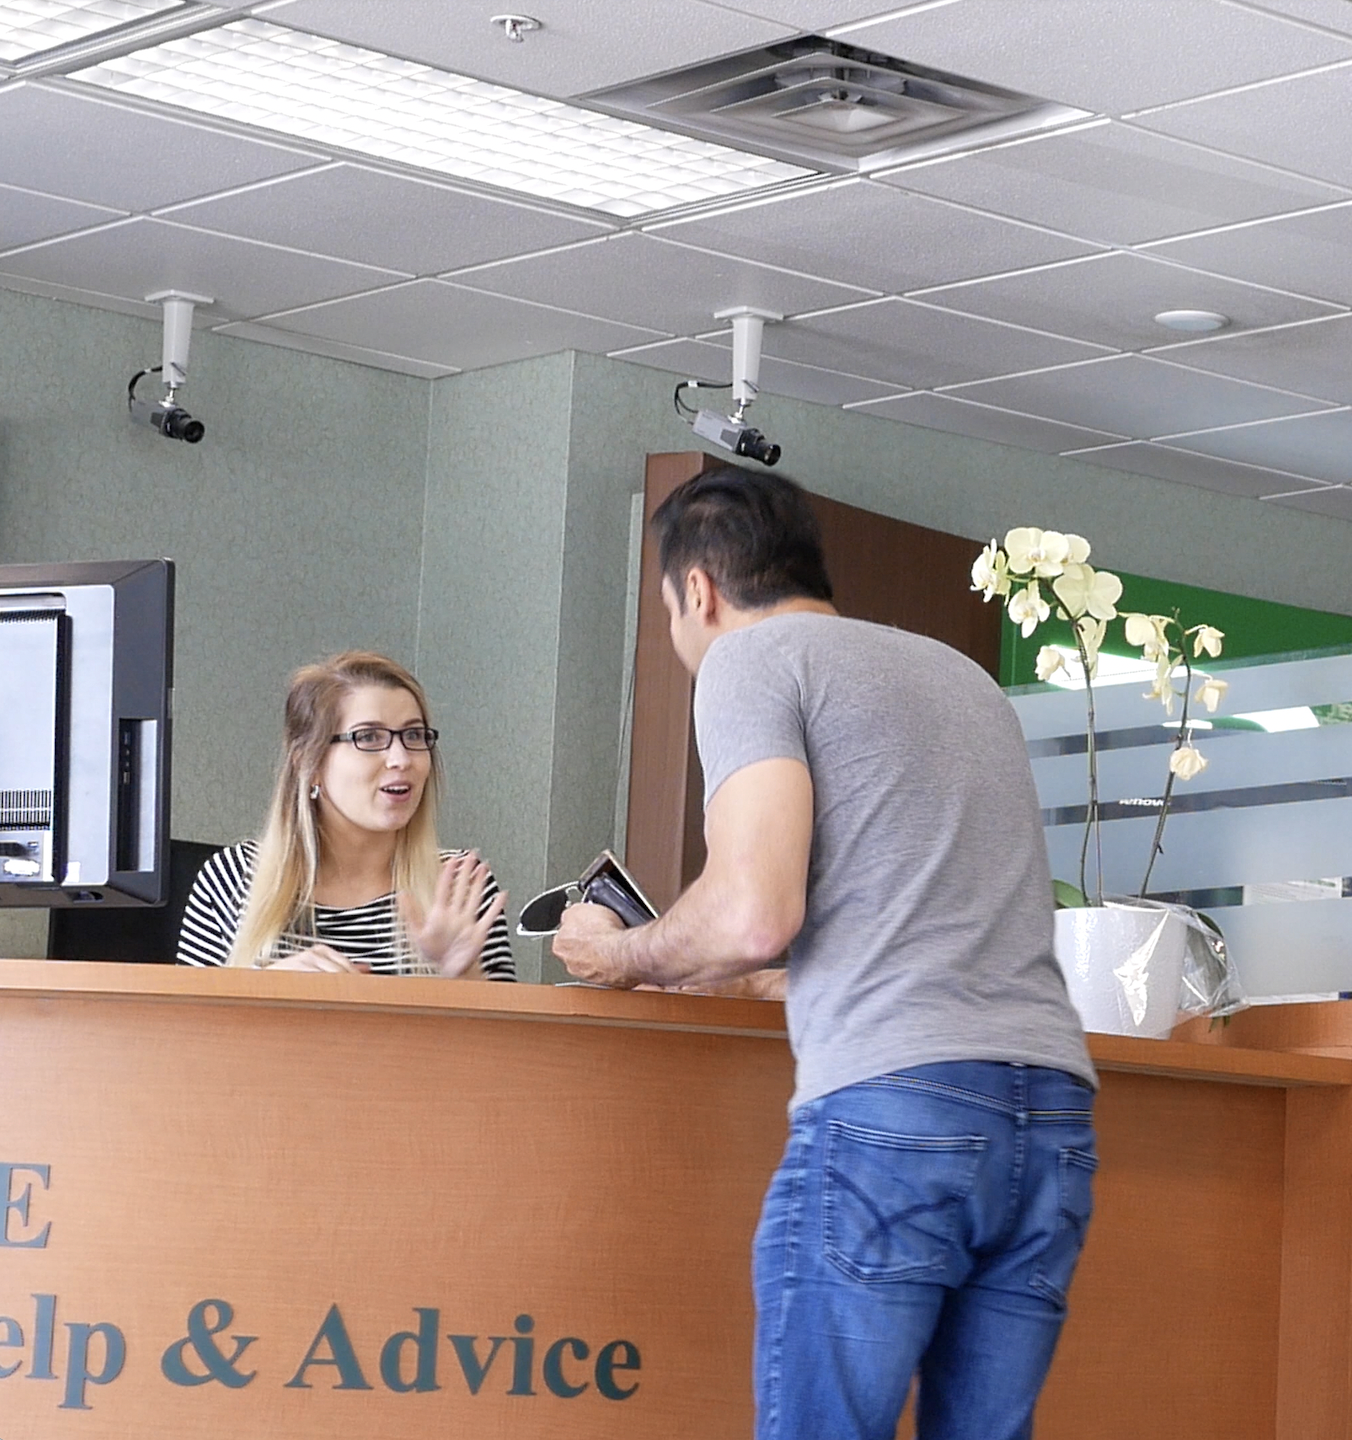 Man is standing is standing by the customer assistance in the bank | Source: Shutterstock.com